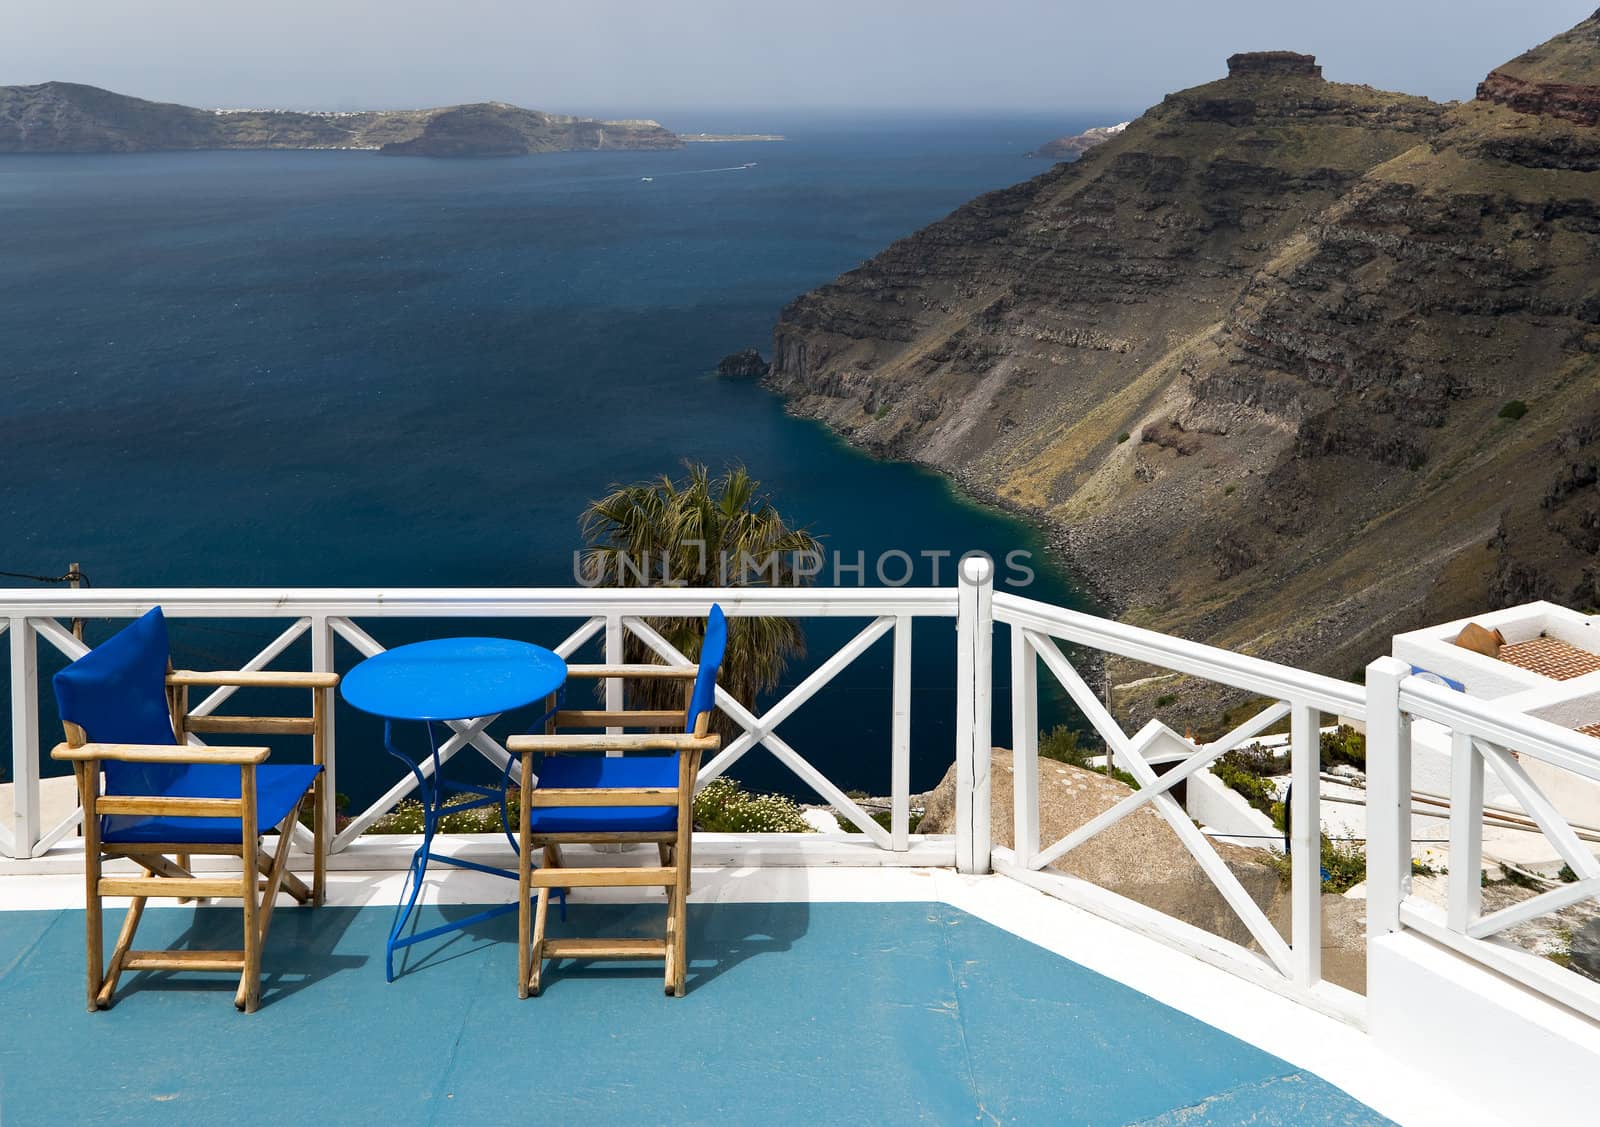 Caldera view in Santorini island with blue chairs and the table 